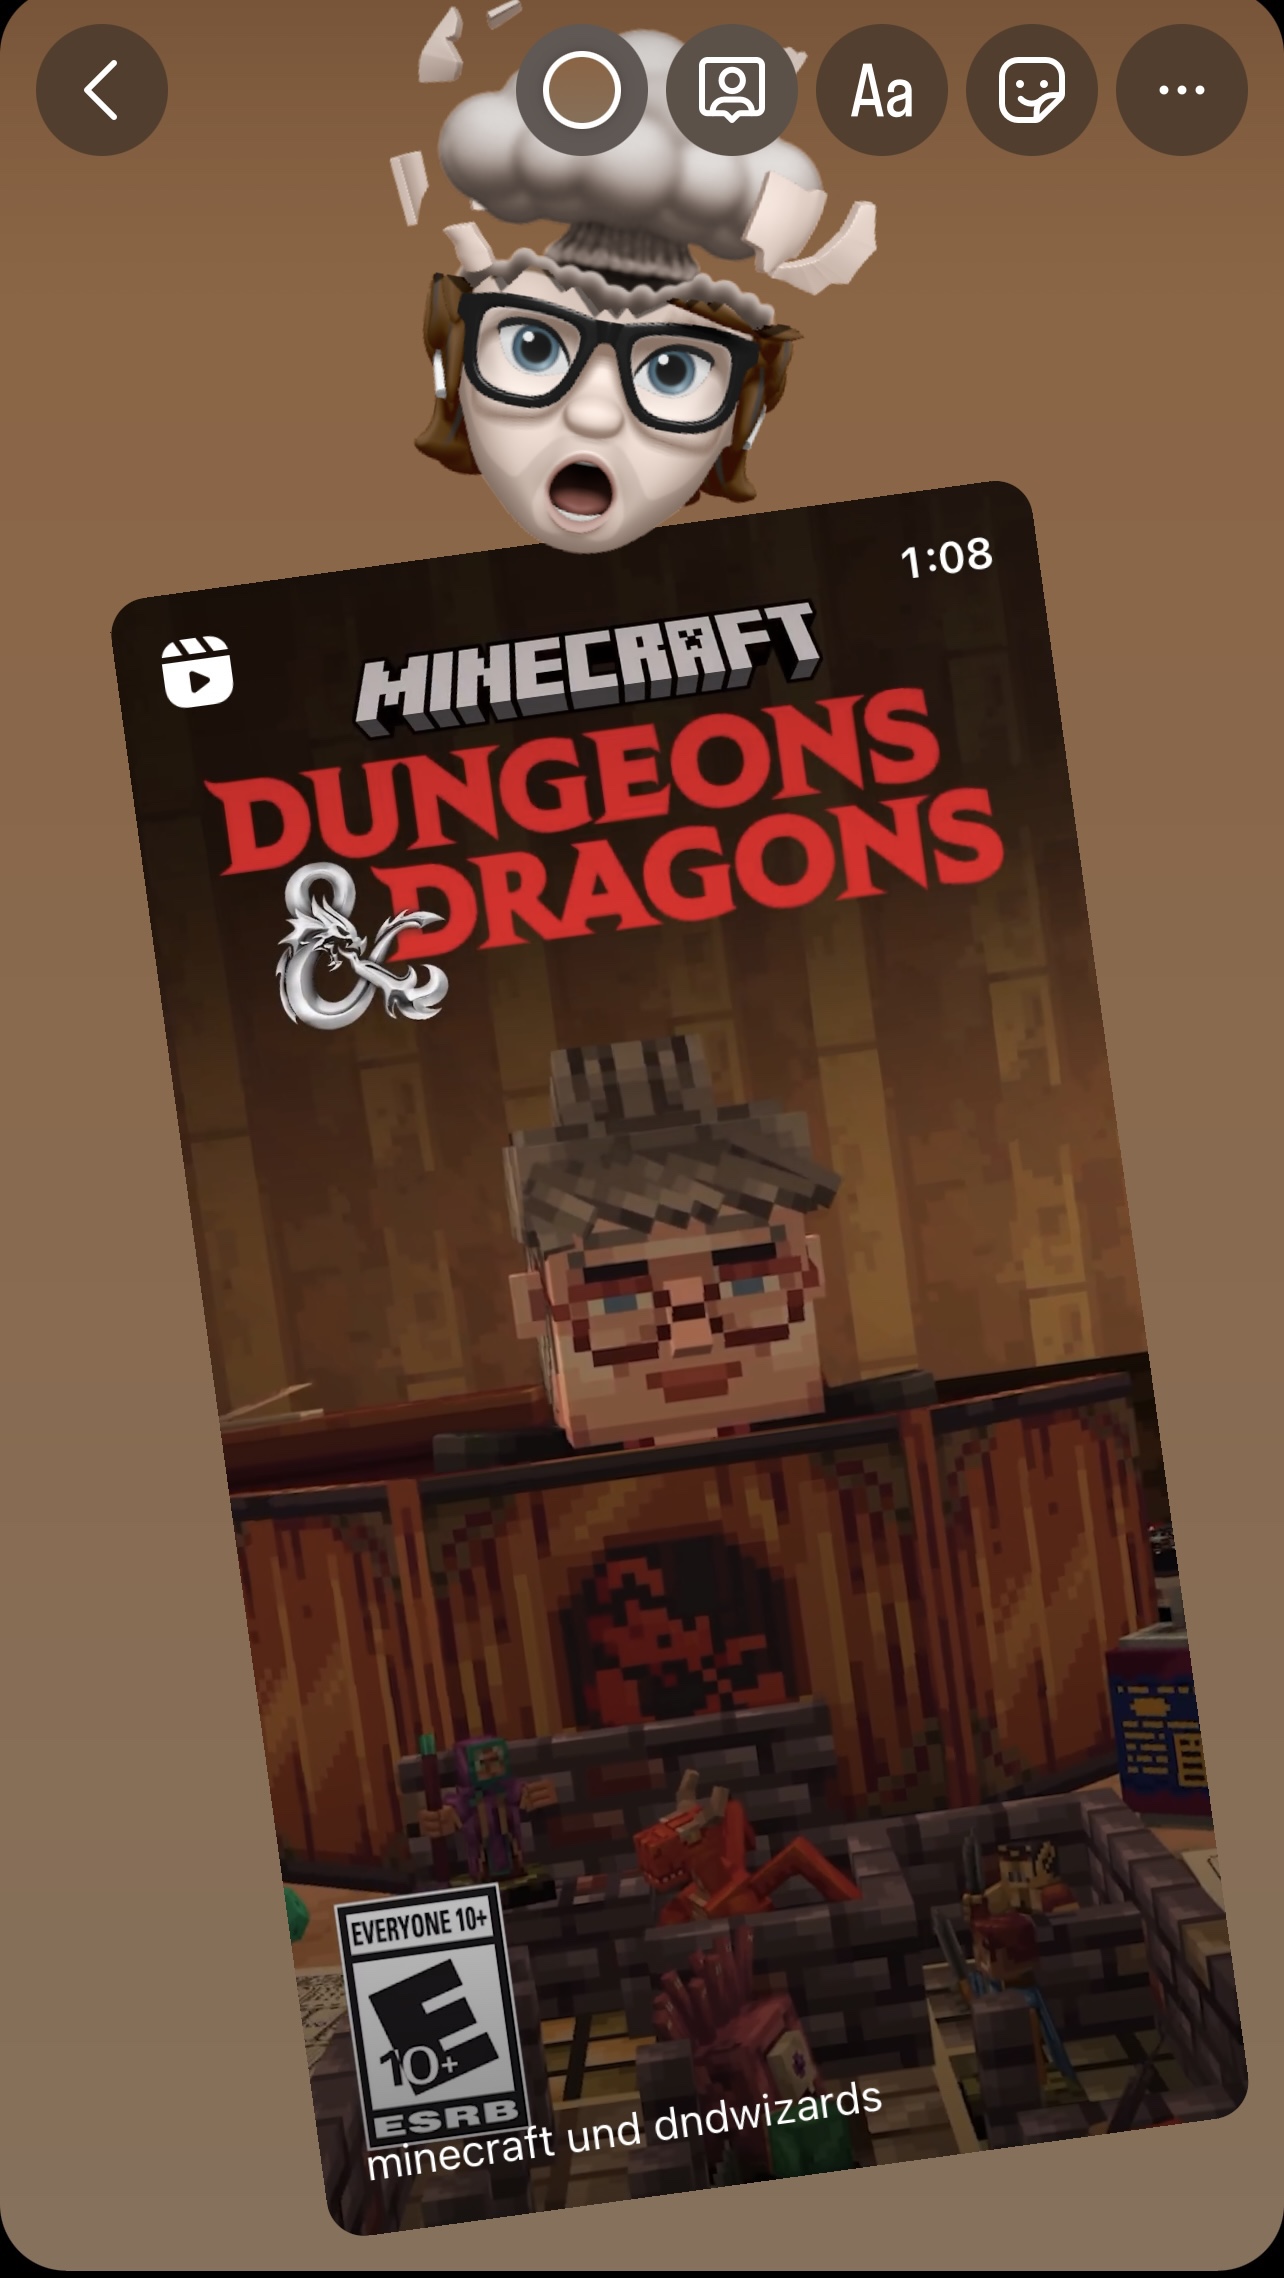 Dungeons & Dragons meets Minecraft?!?!